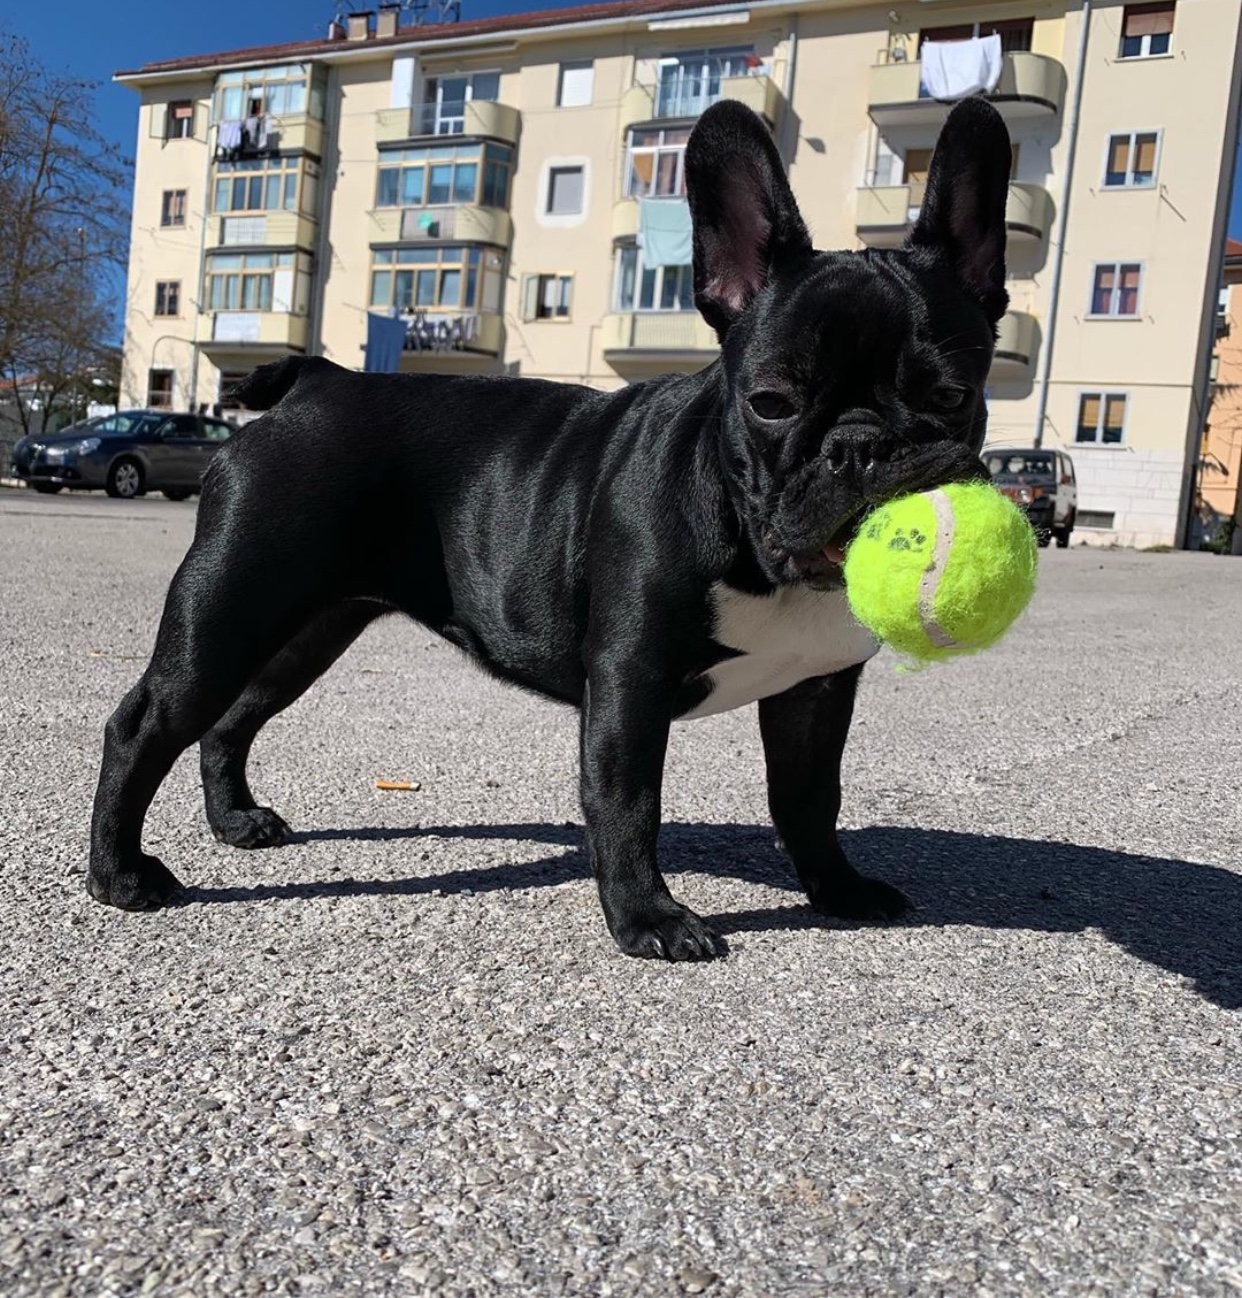 A French Bulldog standing on the pavement while holding a tennis ball with its mouth